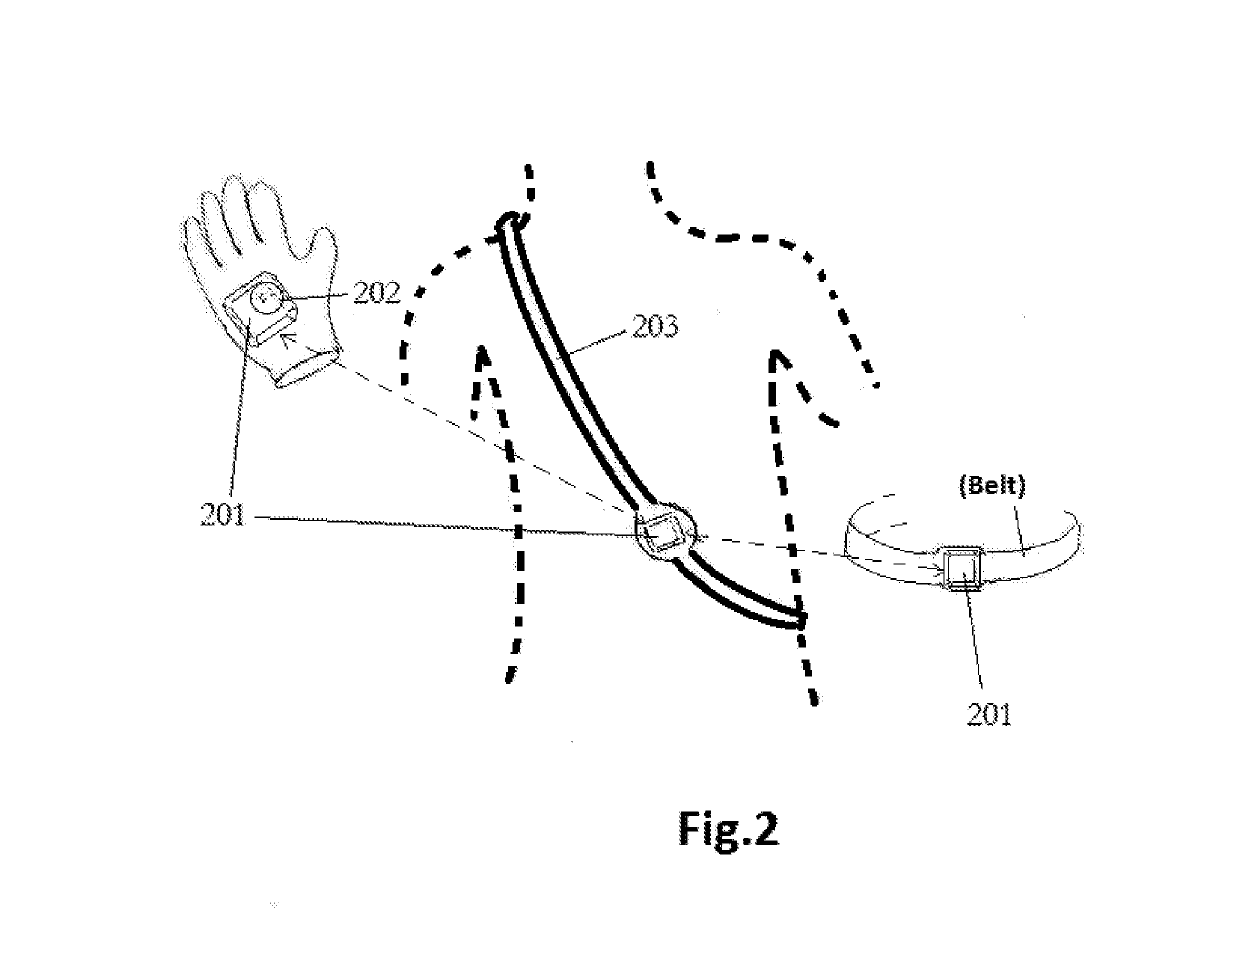 Apparatus and Method of for natural, anti-motion-sickness interaction towards synchronized Visual Vestibular Proprioception interaction including navigation (movement control) as well as target selection in immersive environments such as VR/AR/simulation/game, and modular multi-use sensing/processing system to satisfy different usage scenarios with different form of combination